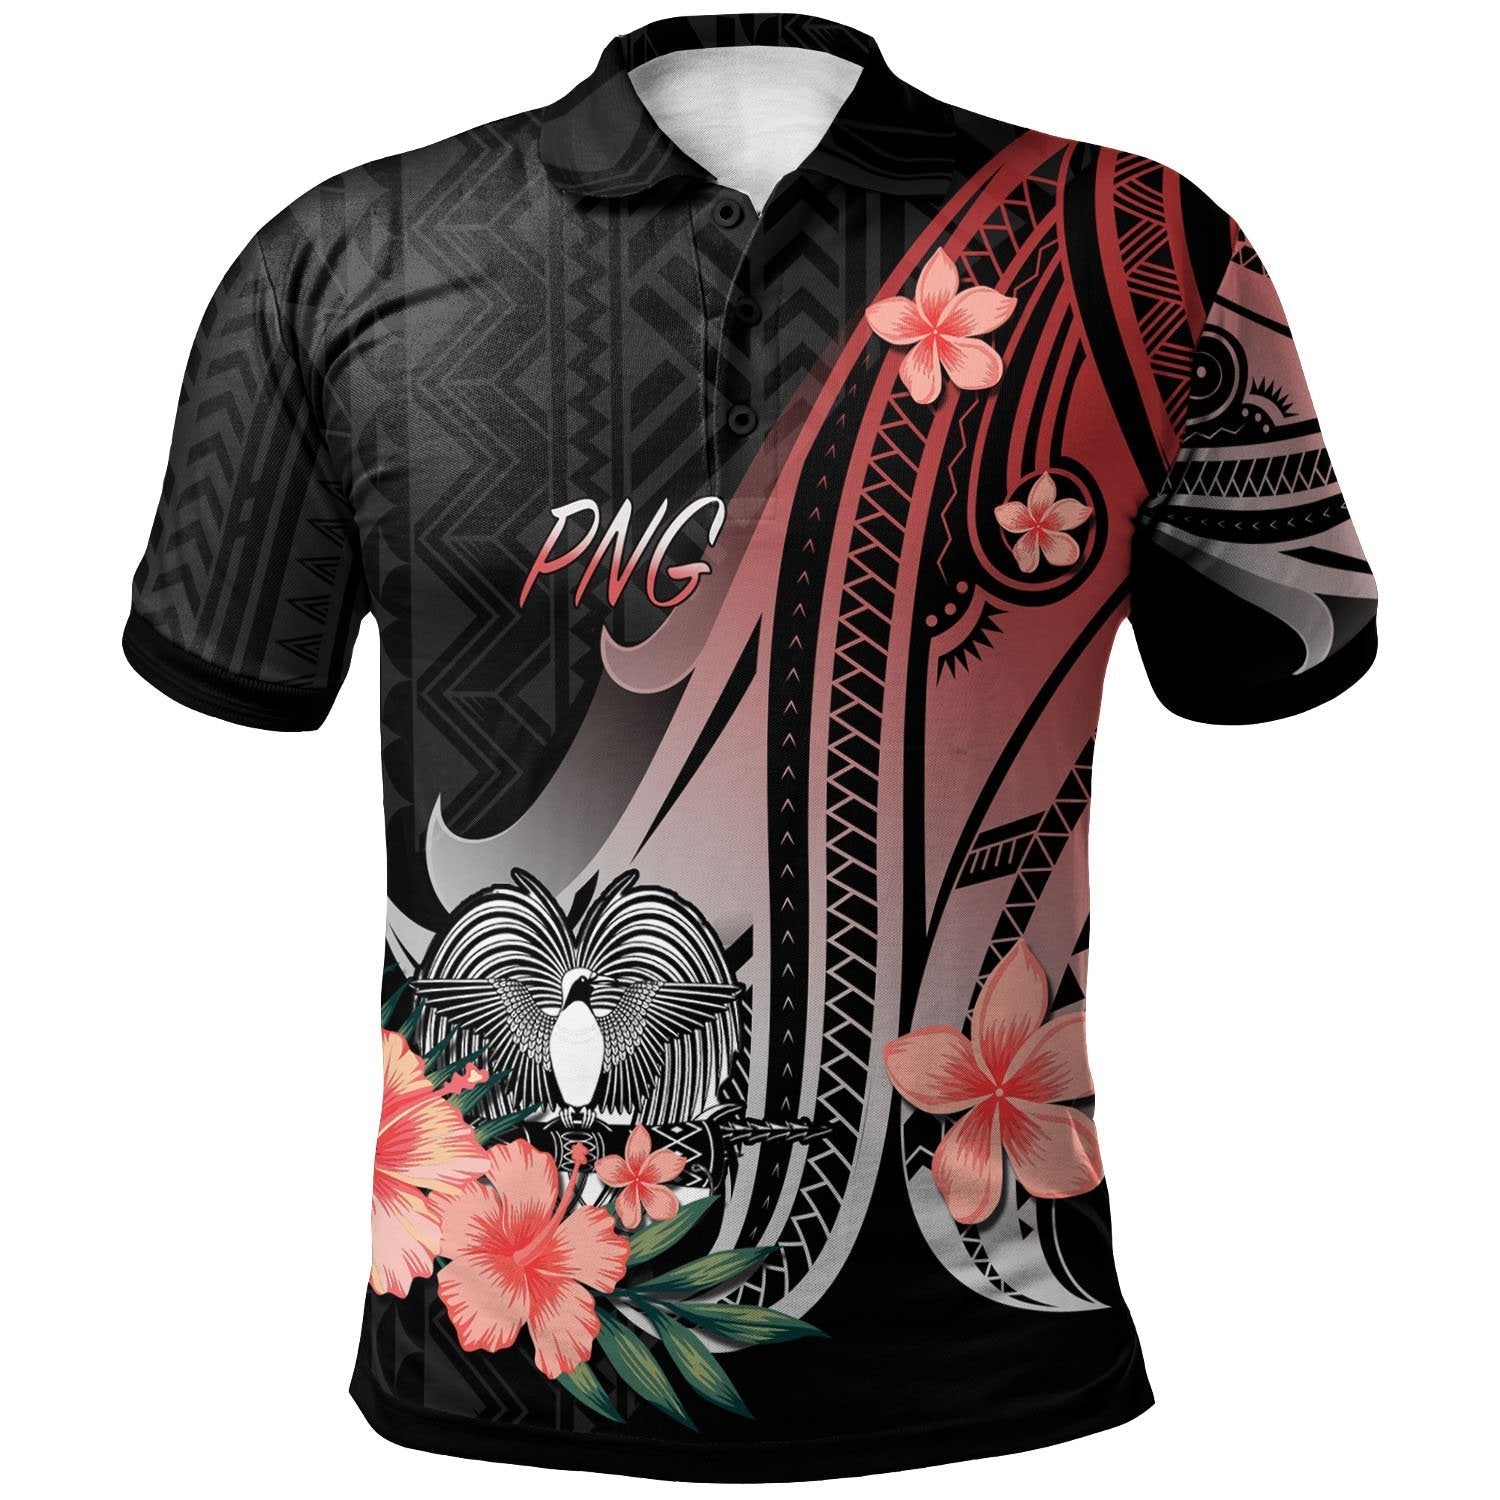 papua-new-guinea-polo-shirt-red-polynesian-hibiscus-pattern-style